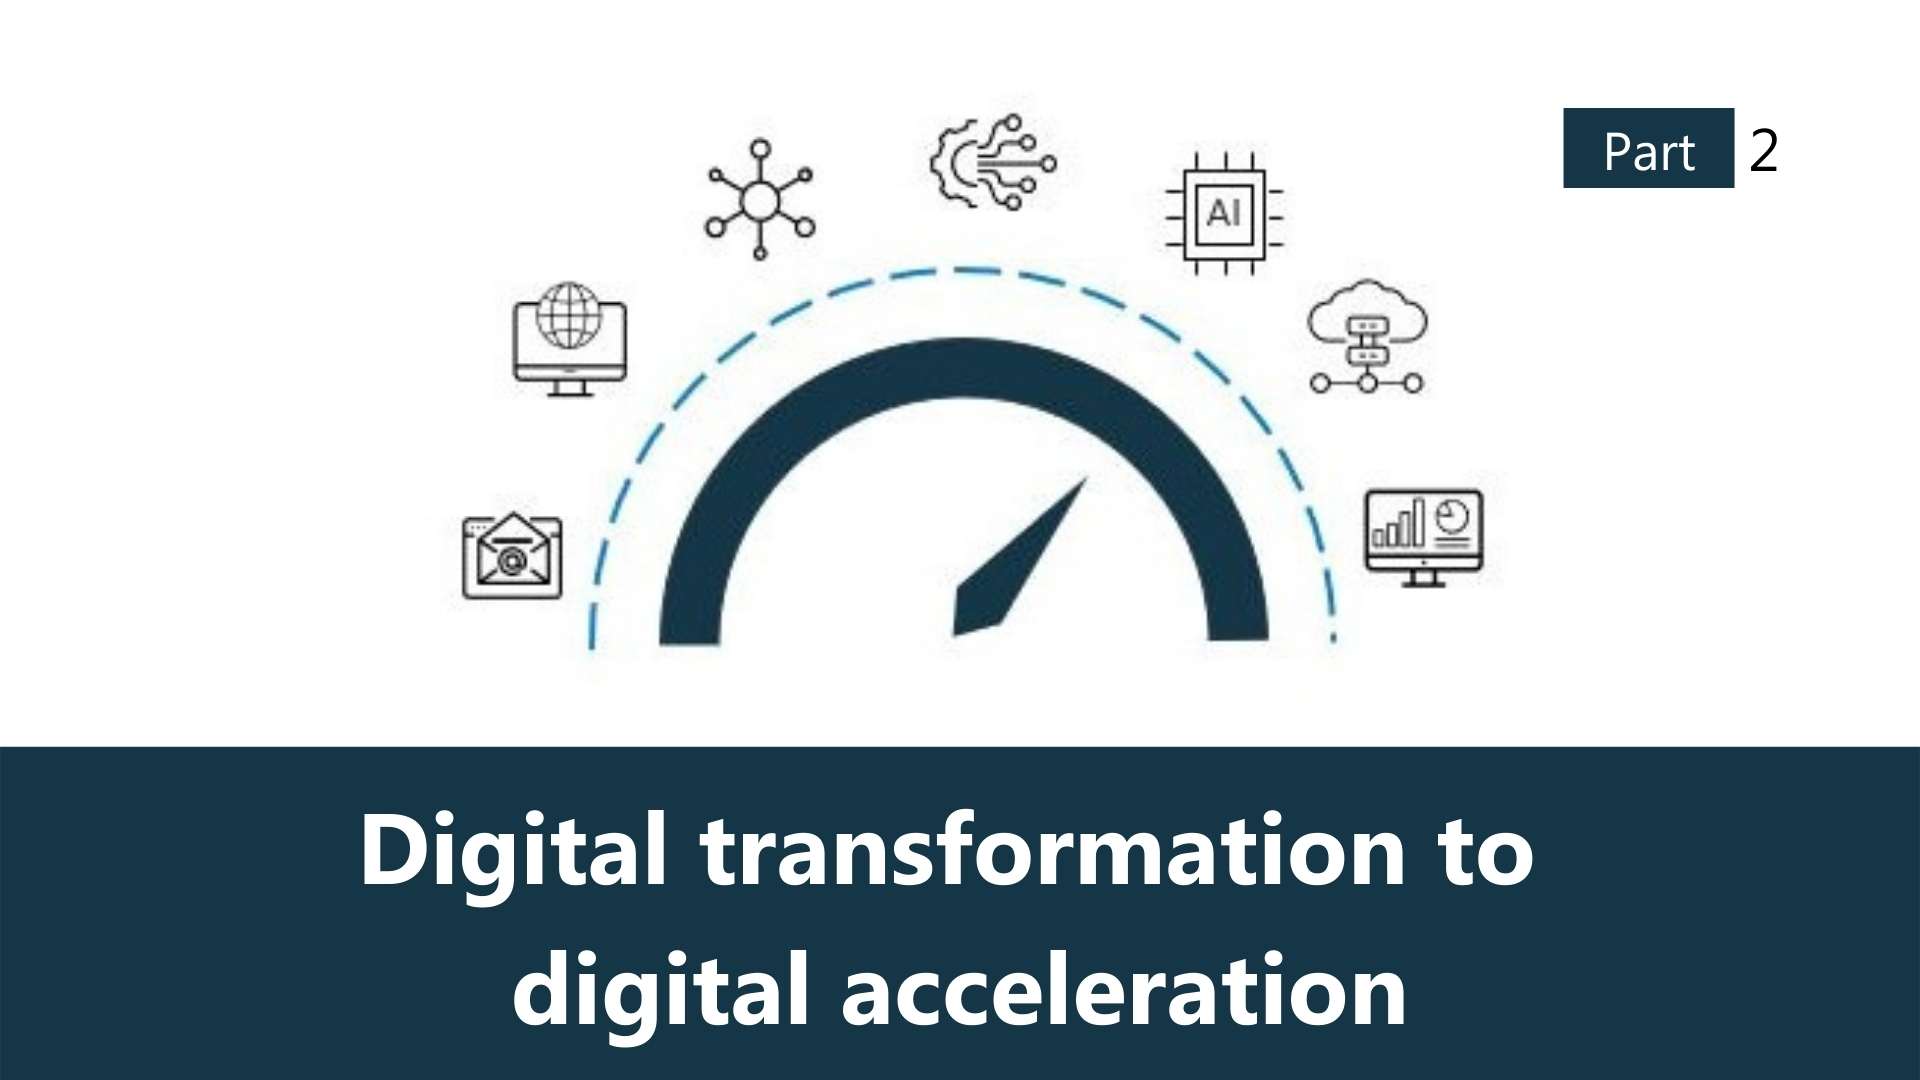 How to transition from digital transformation to digital acceleration